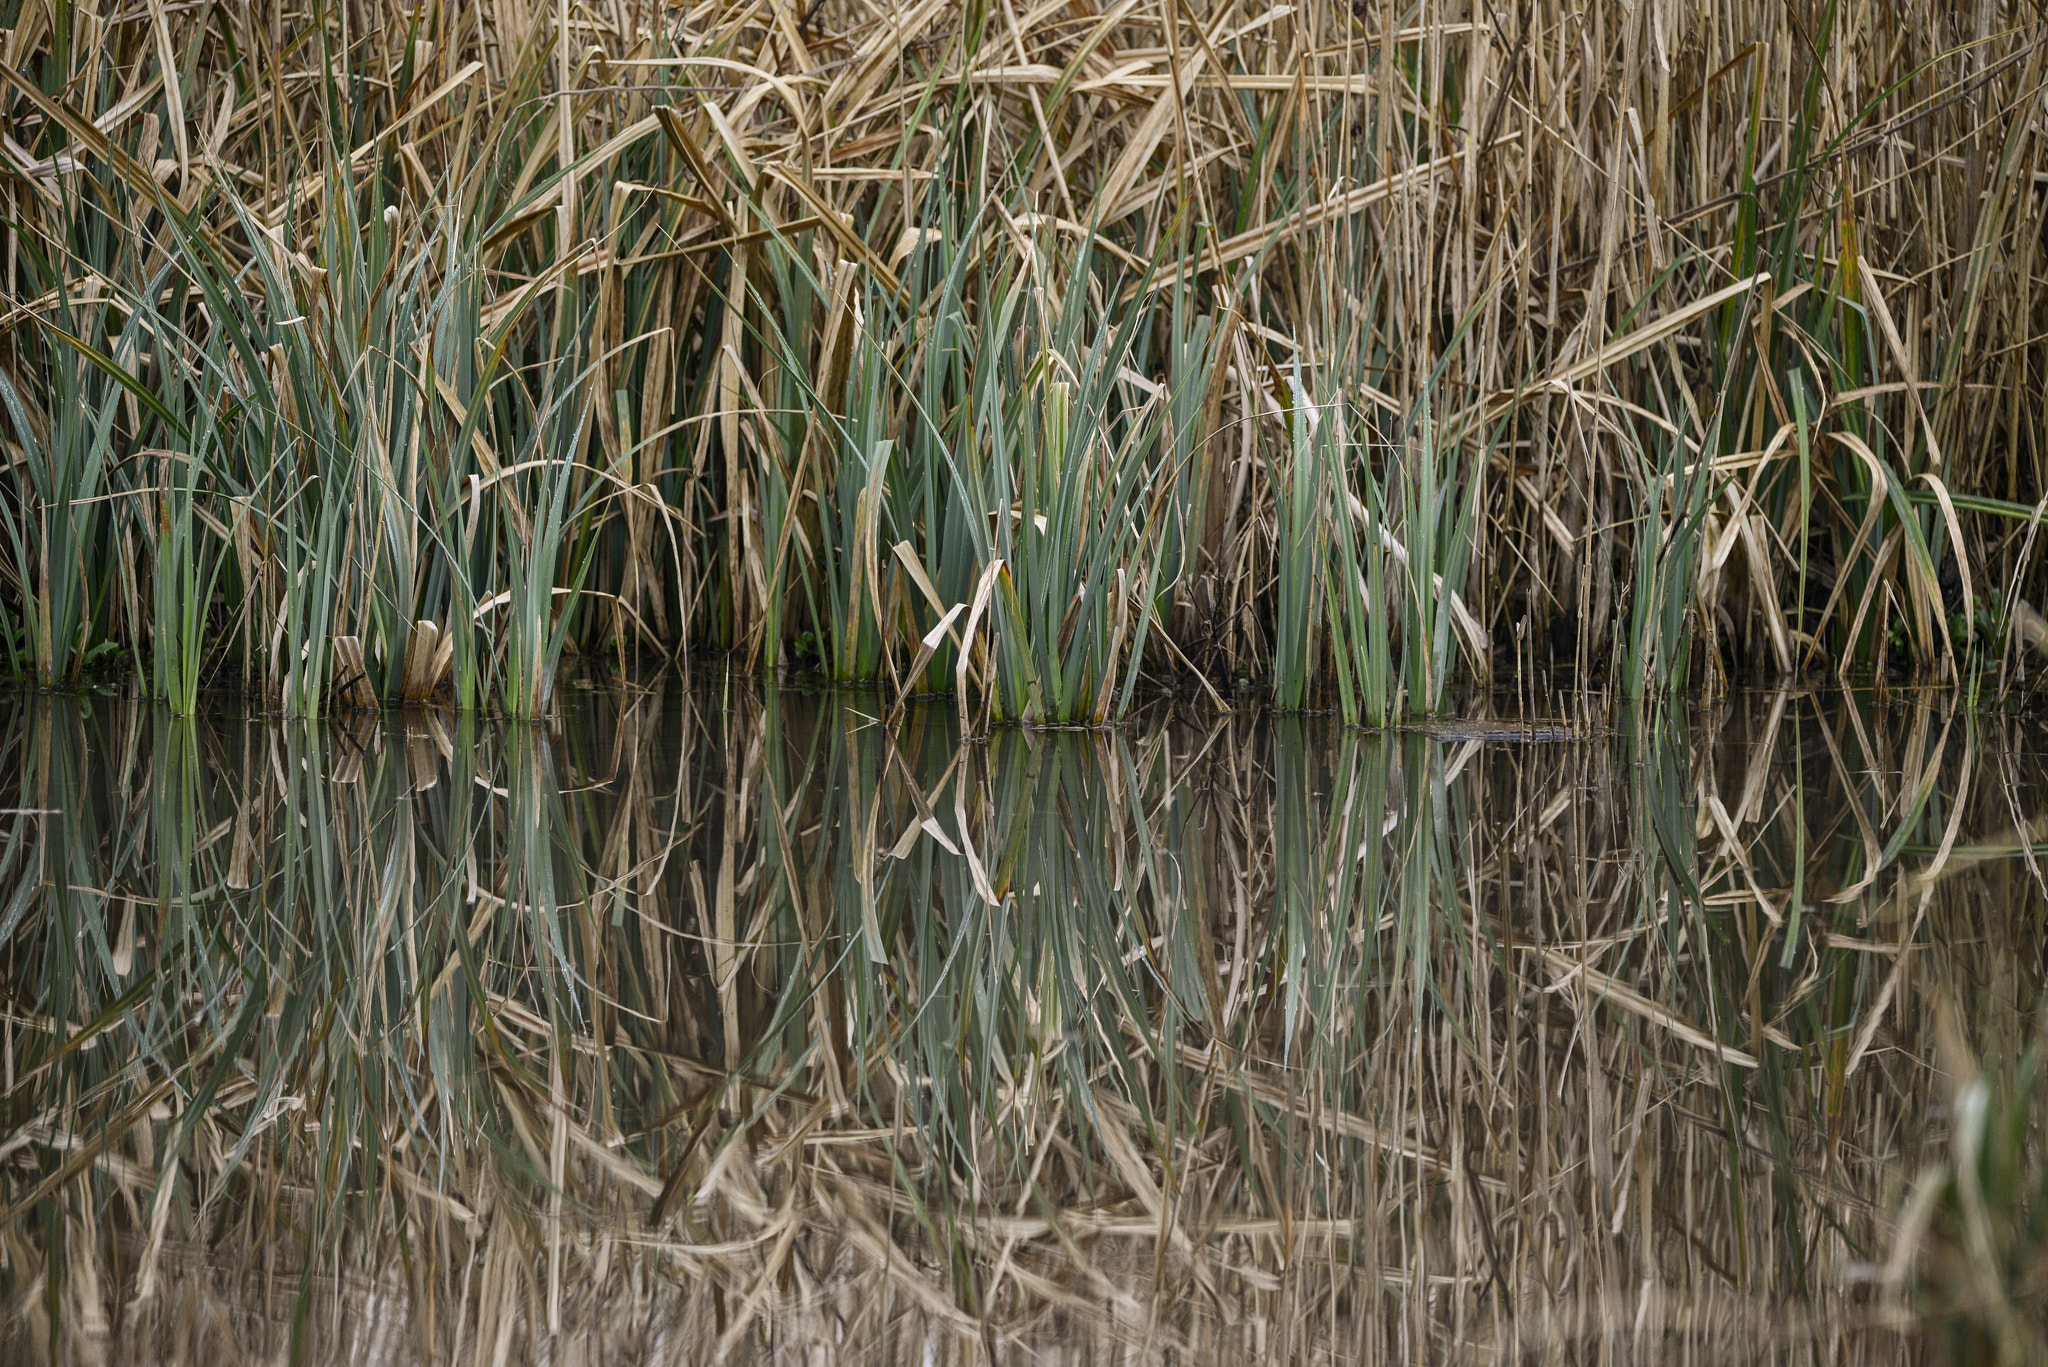 Nikon D800 + Sigma 150-600mm F5-6.3 DG OS HSM | C sample photo. Close up image of reeds in water during spring photography